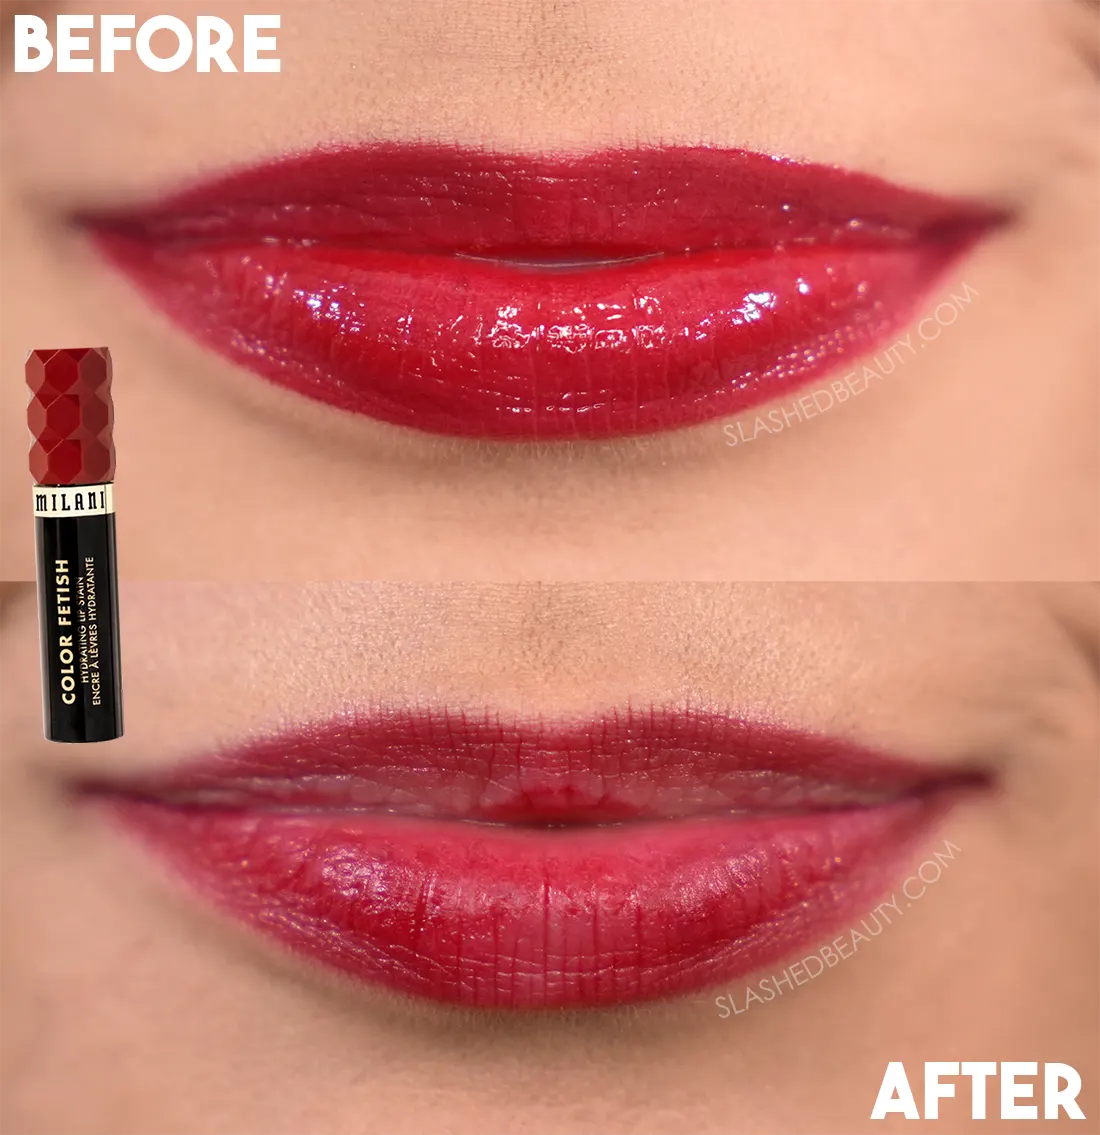 Before and after 8 ،urs: Milani Hydrating Color Fetish Lip Stain in That